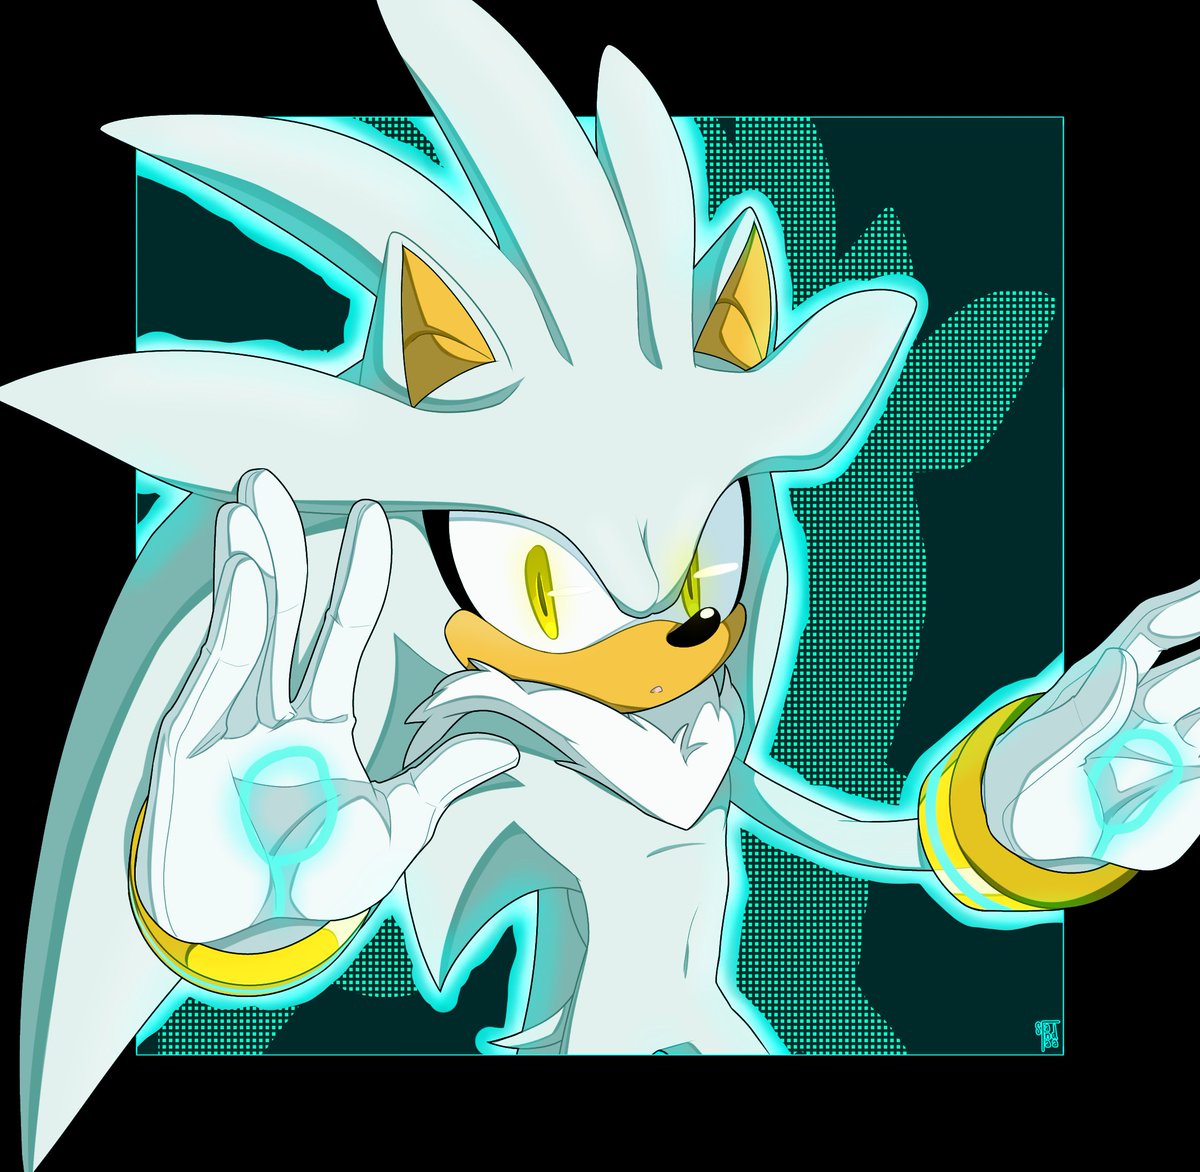 The white hedgehog from the future ! ⚪
#sonic #SonicTheHedeghog #SonicTheHedgehog #sonicfanart #sonic_the_hedgehog #silver #silverthehedgehog #silver_the_hedgehog #silverfanart